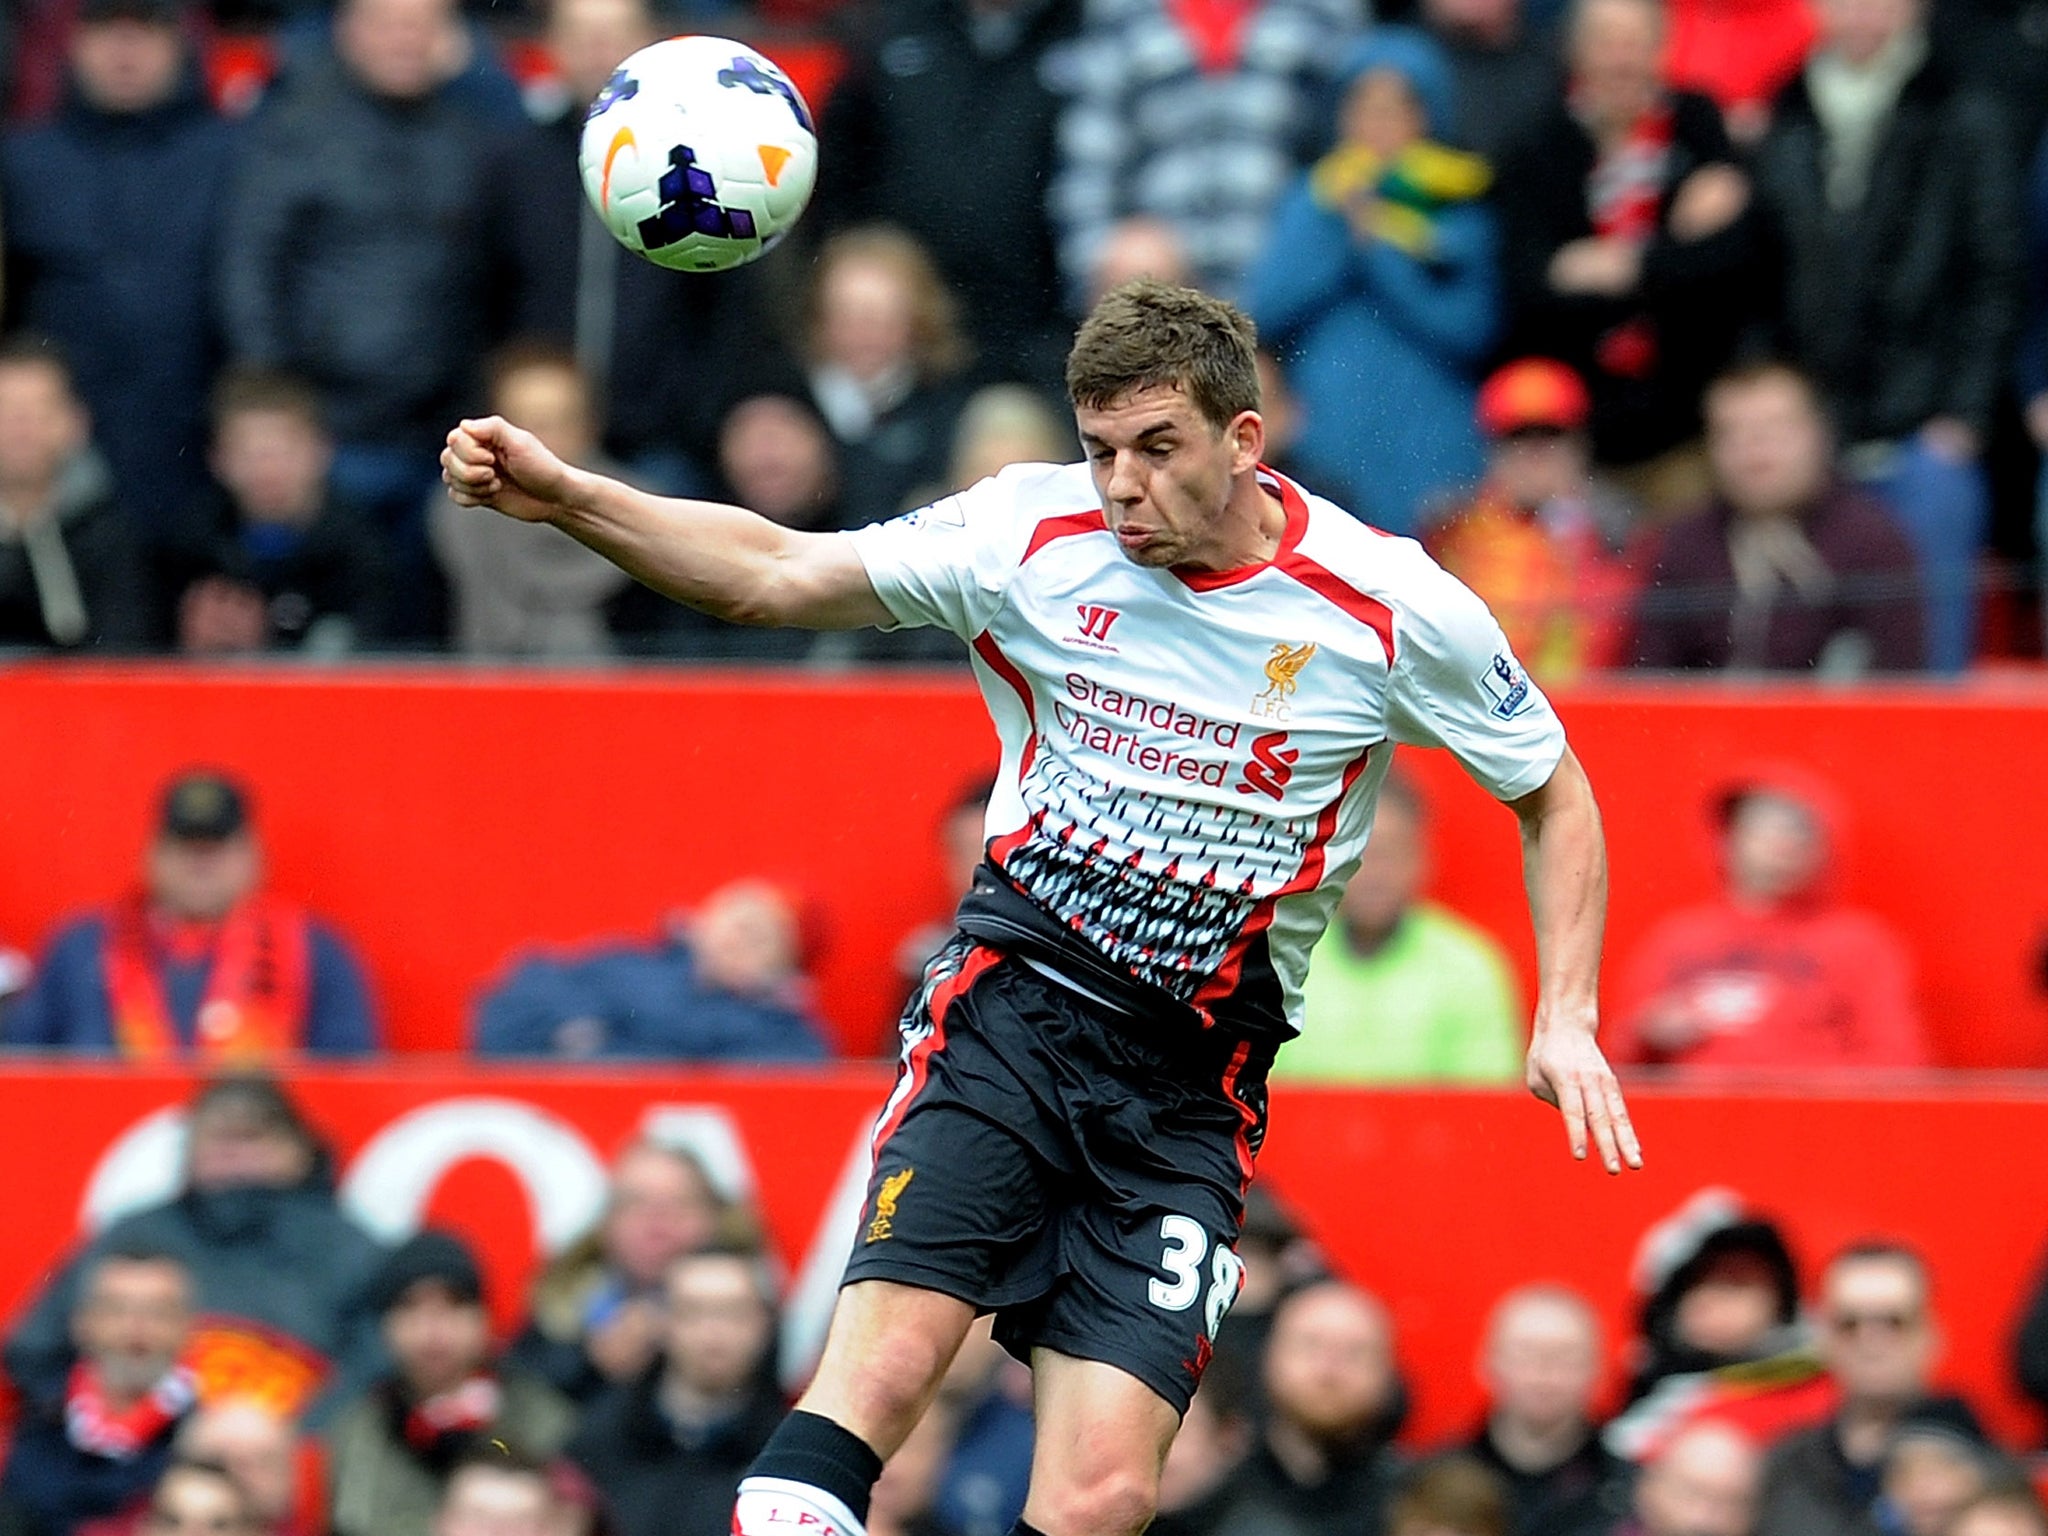 Liverpool defender Jon Flanagan will be offered a new contract, Brendan Rodgers has confirmed